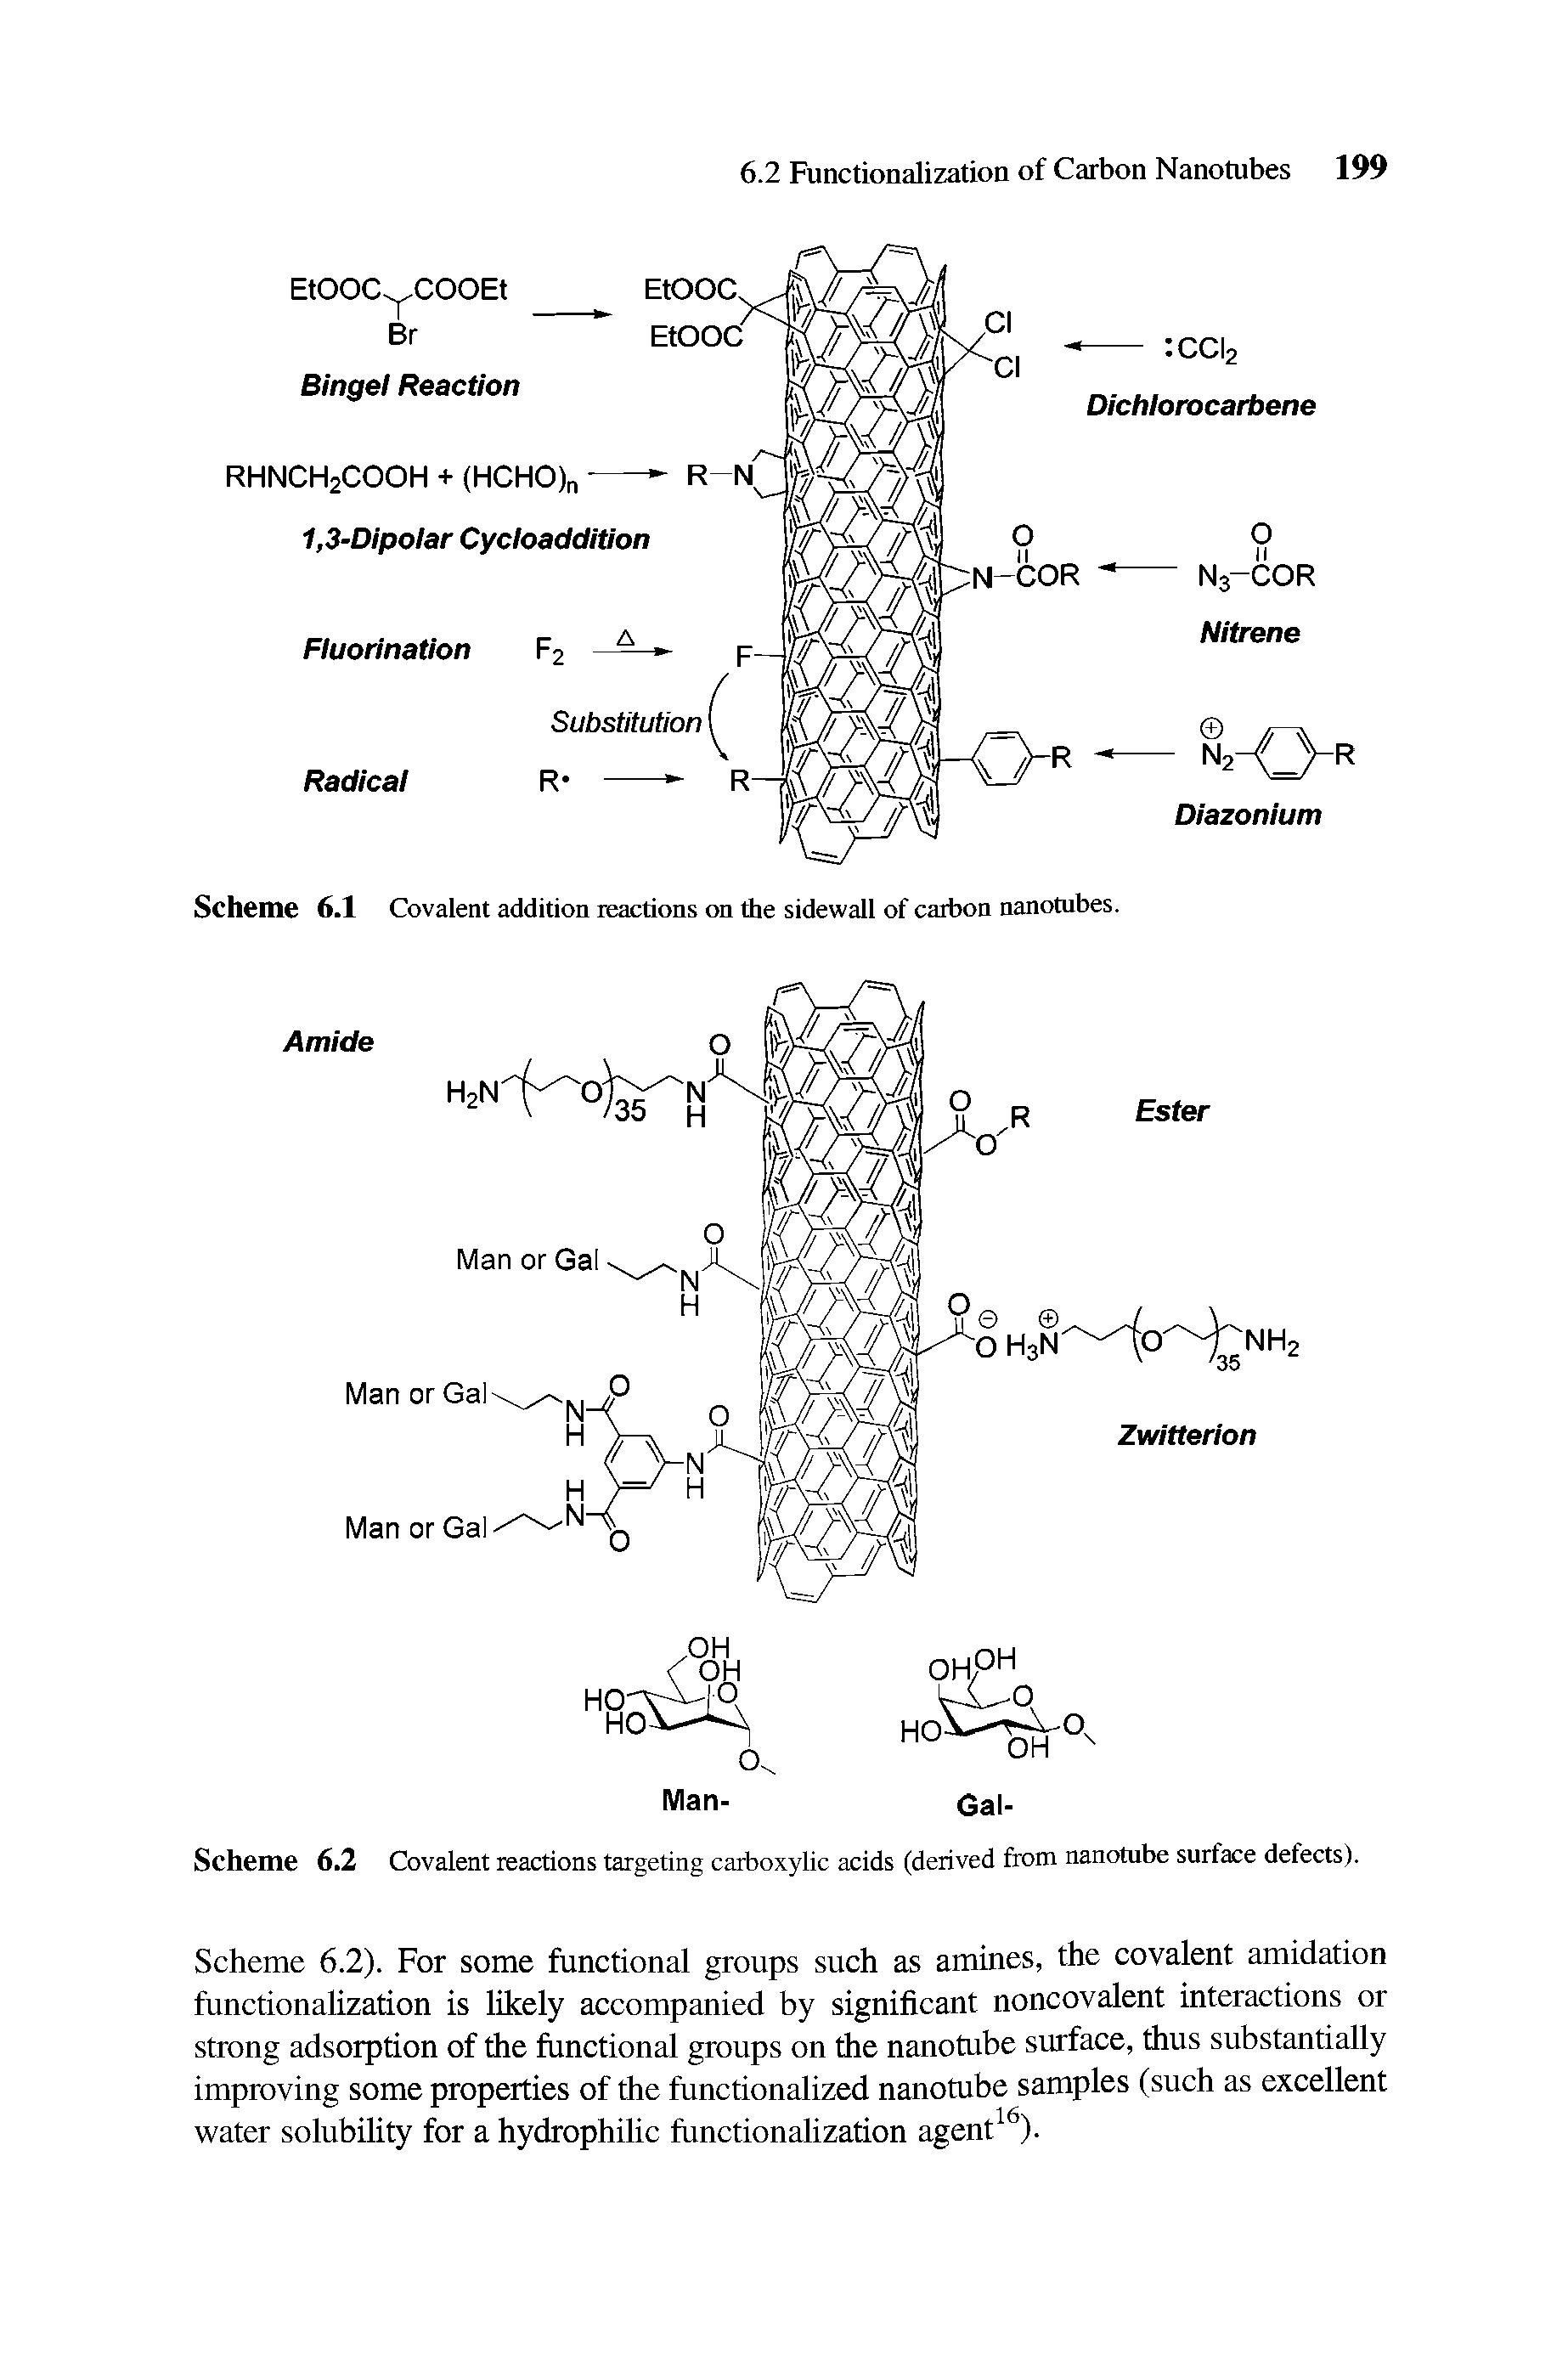 Scheme 6.2). For some functional groups such as amines, the covalent amidation functionalization is likely accompanied by significant noncovalent interactions or strong adsorption of the functional groups on the nanotube surface, thus substantially improving some properties of the functionalized nanotube samples (such as excellent water solubility for a hydrophilic functionalization agent16).